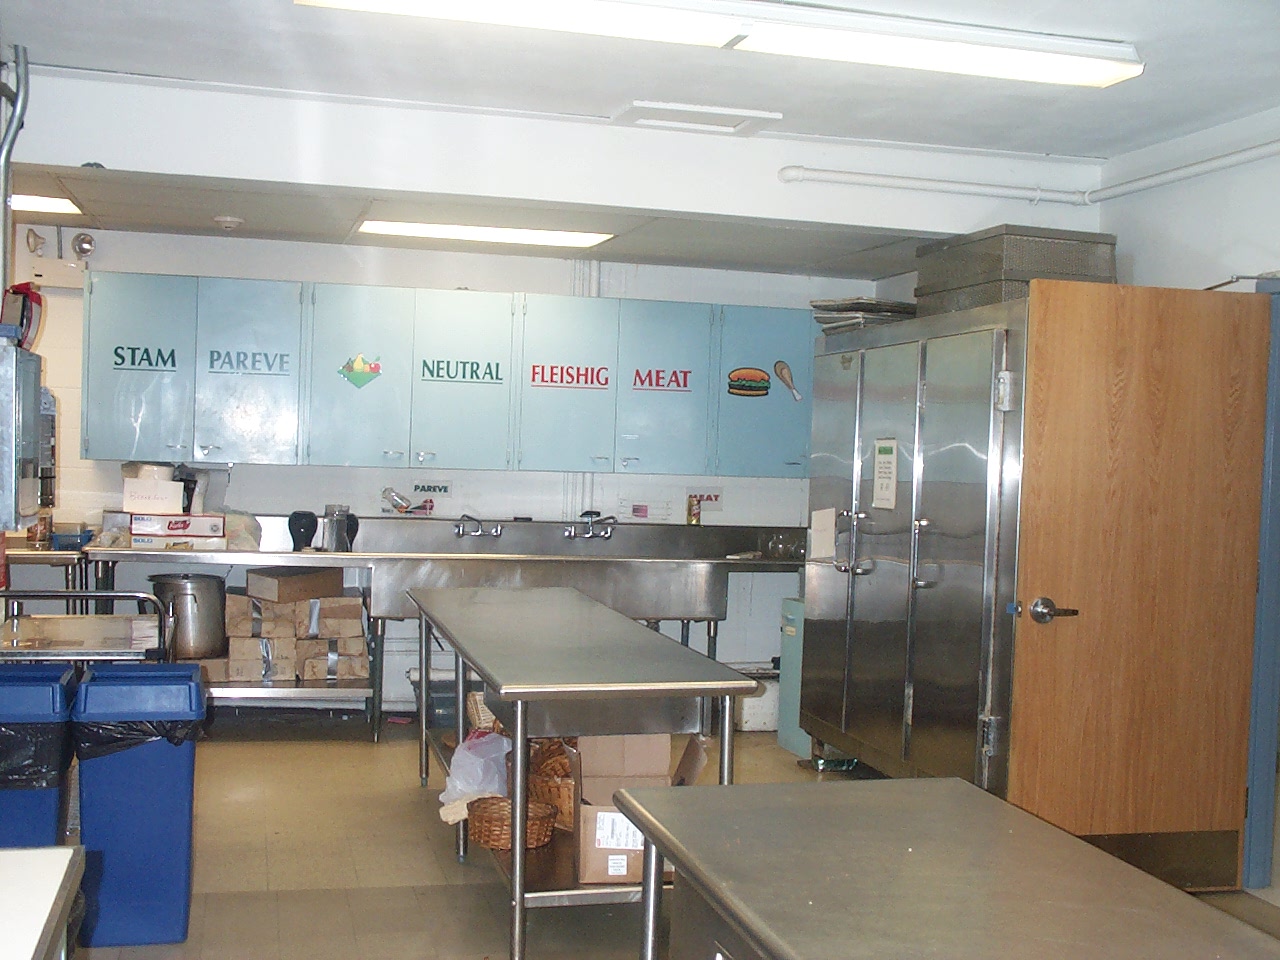 secondary view of the kitchen with labeled cabinets